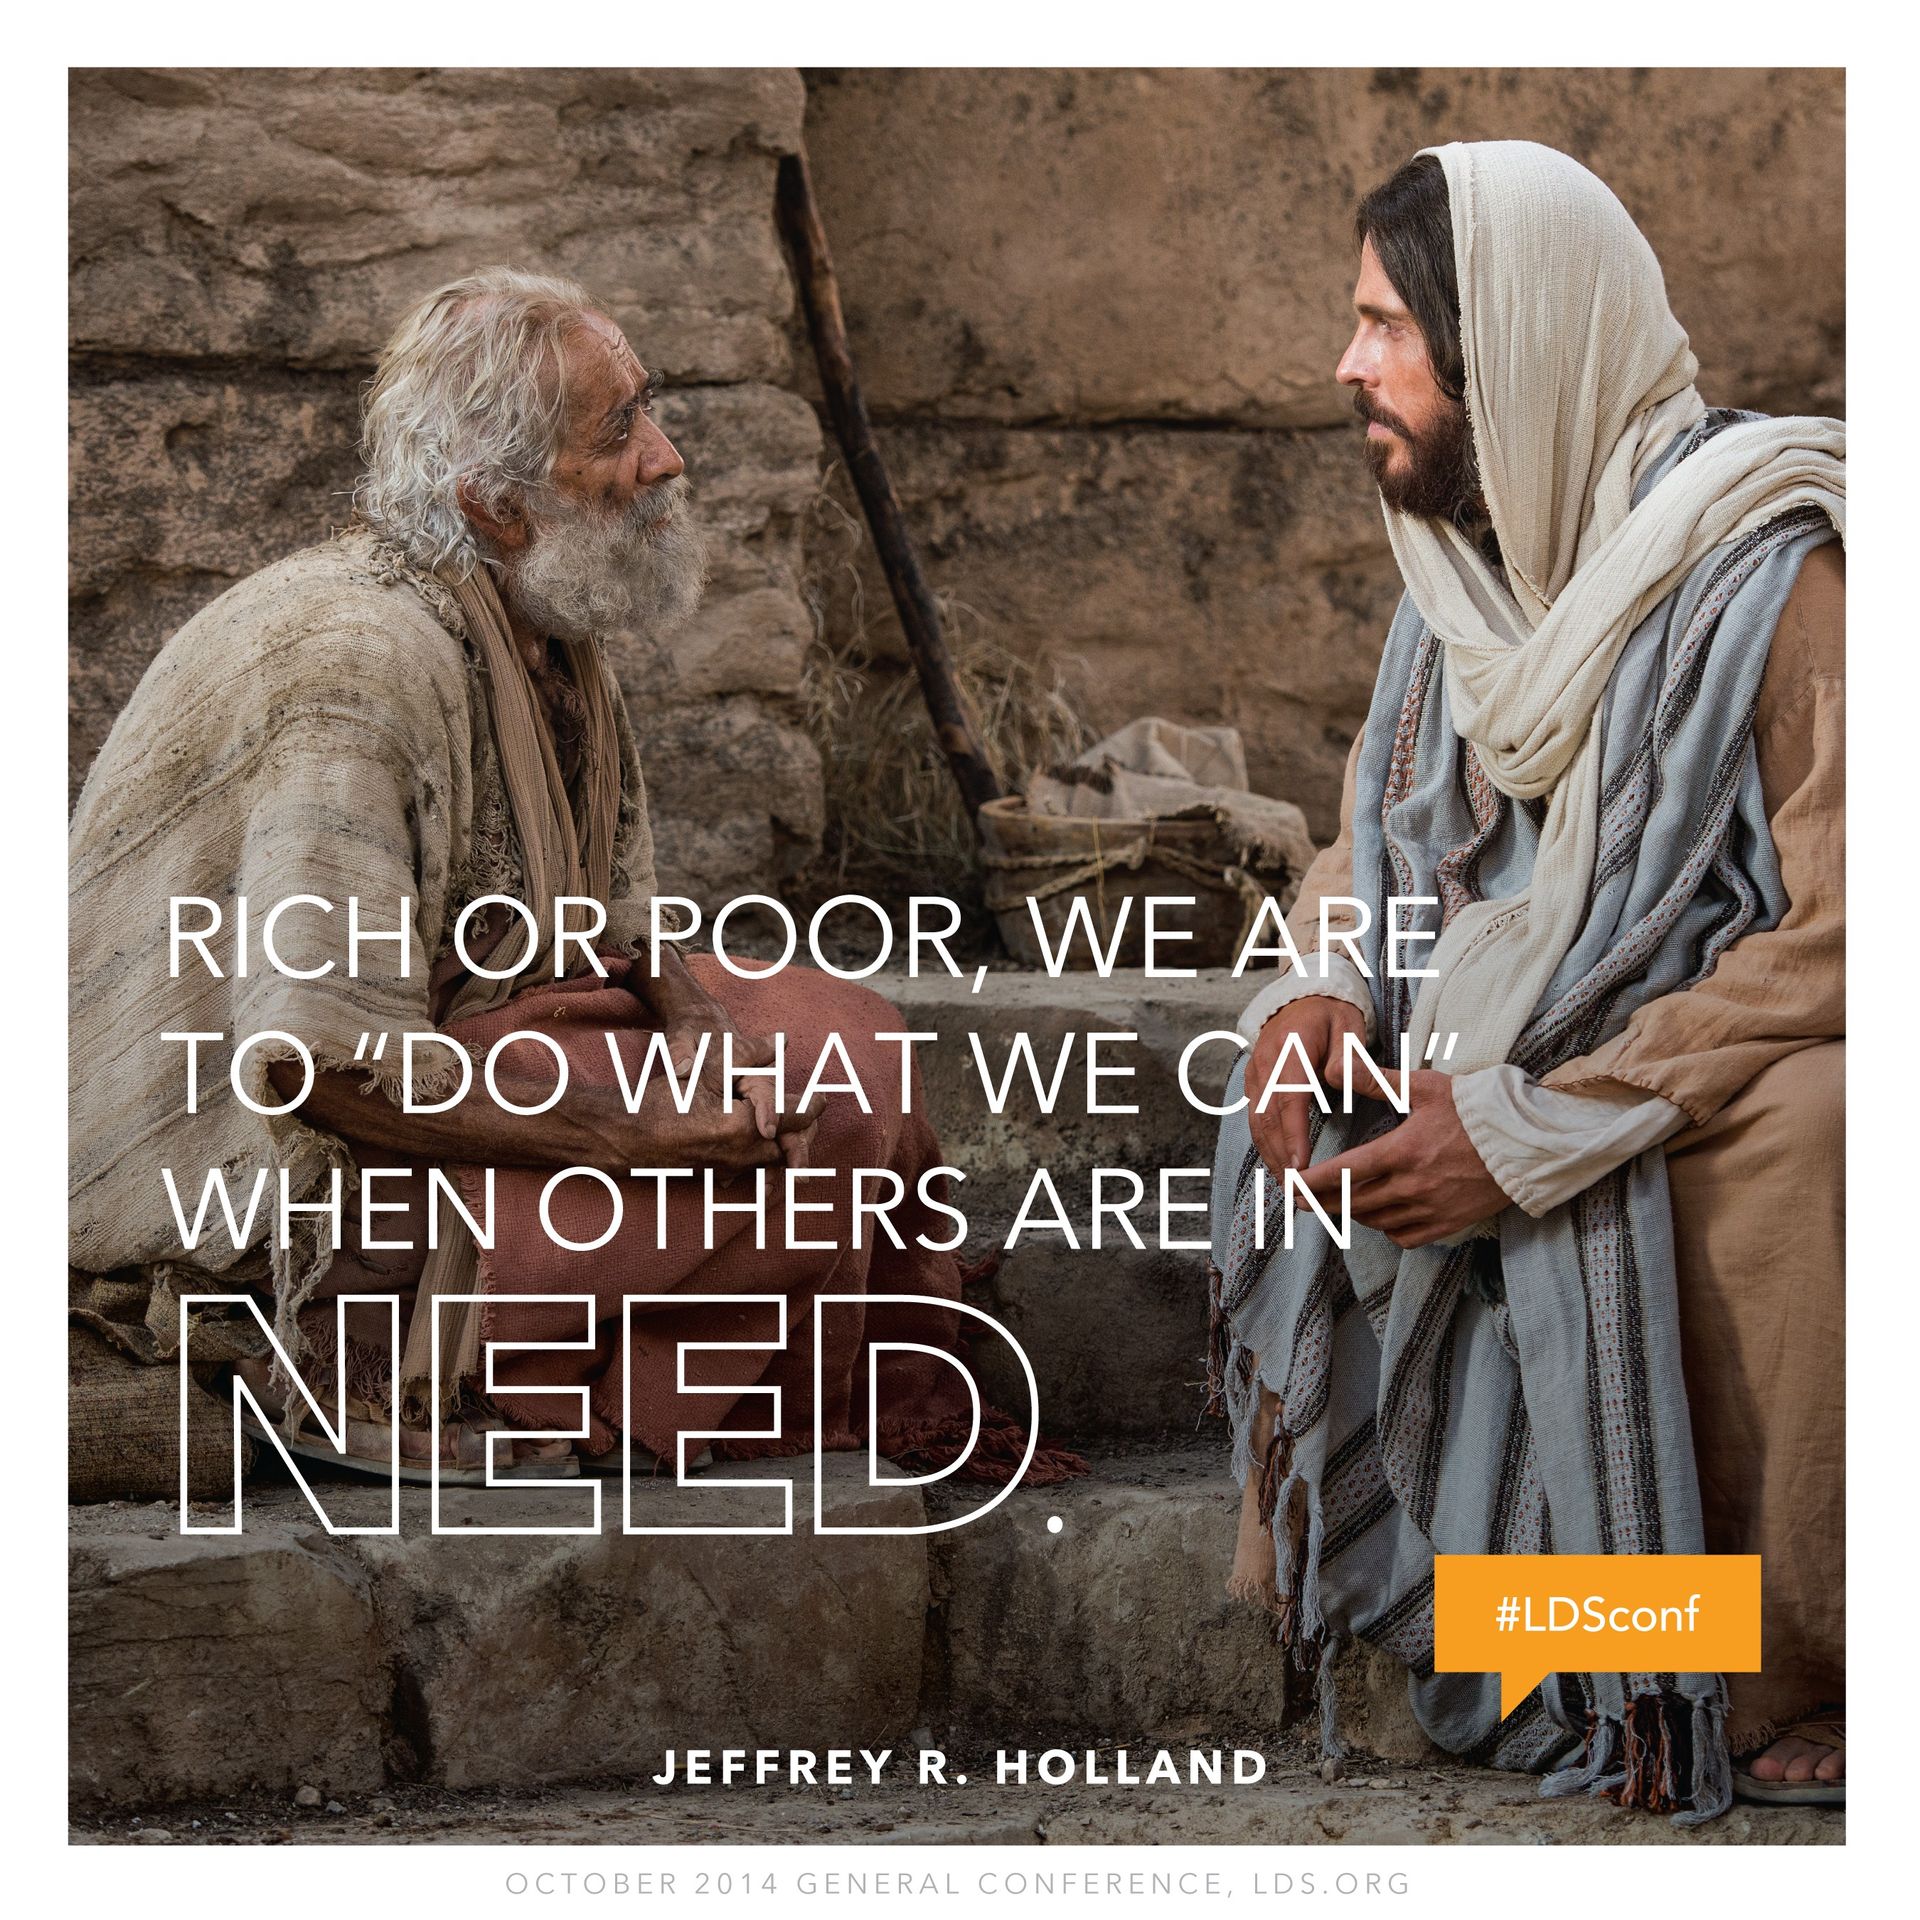 “Rich or poor, we are to ‘do what we can’ when others are in need.”—Elder Jeffrey R. Holland, “Are We Not All Beggars?” © undefined ipCode 1.